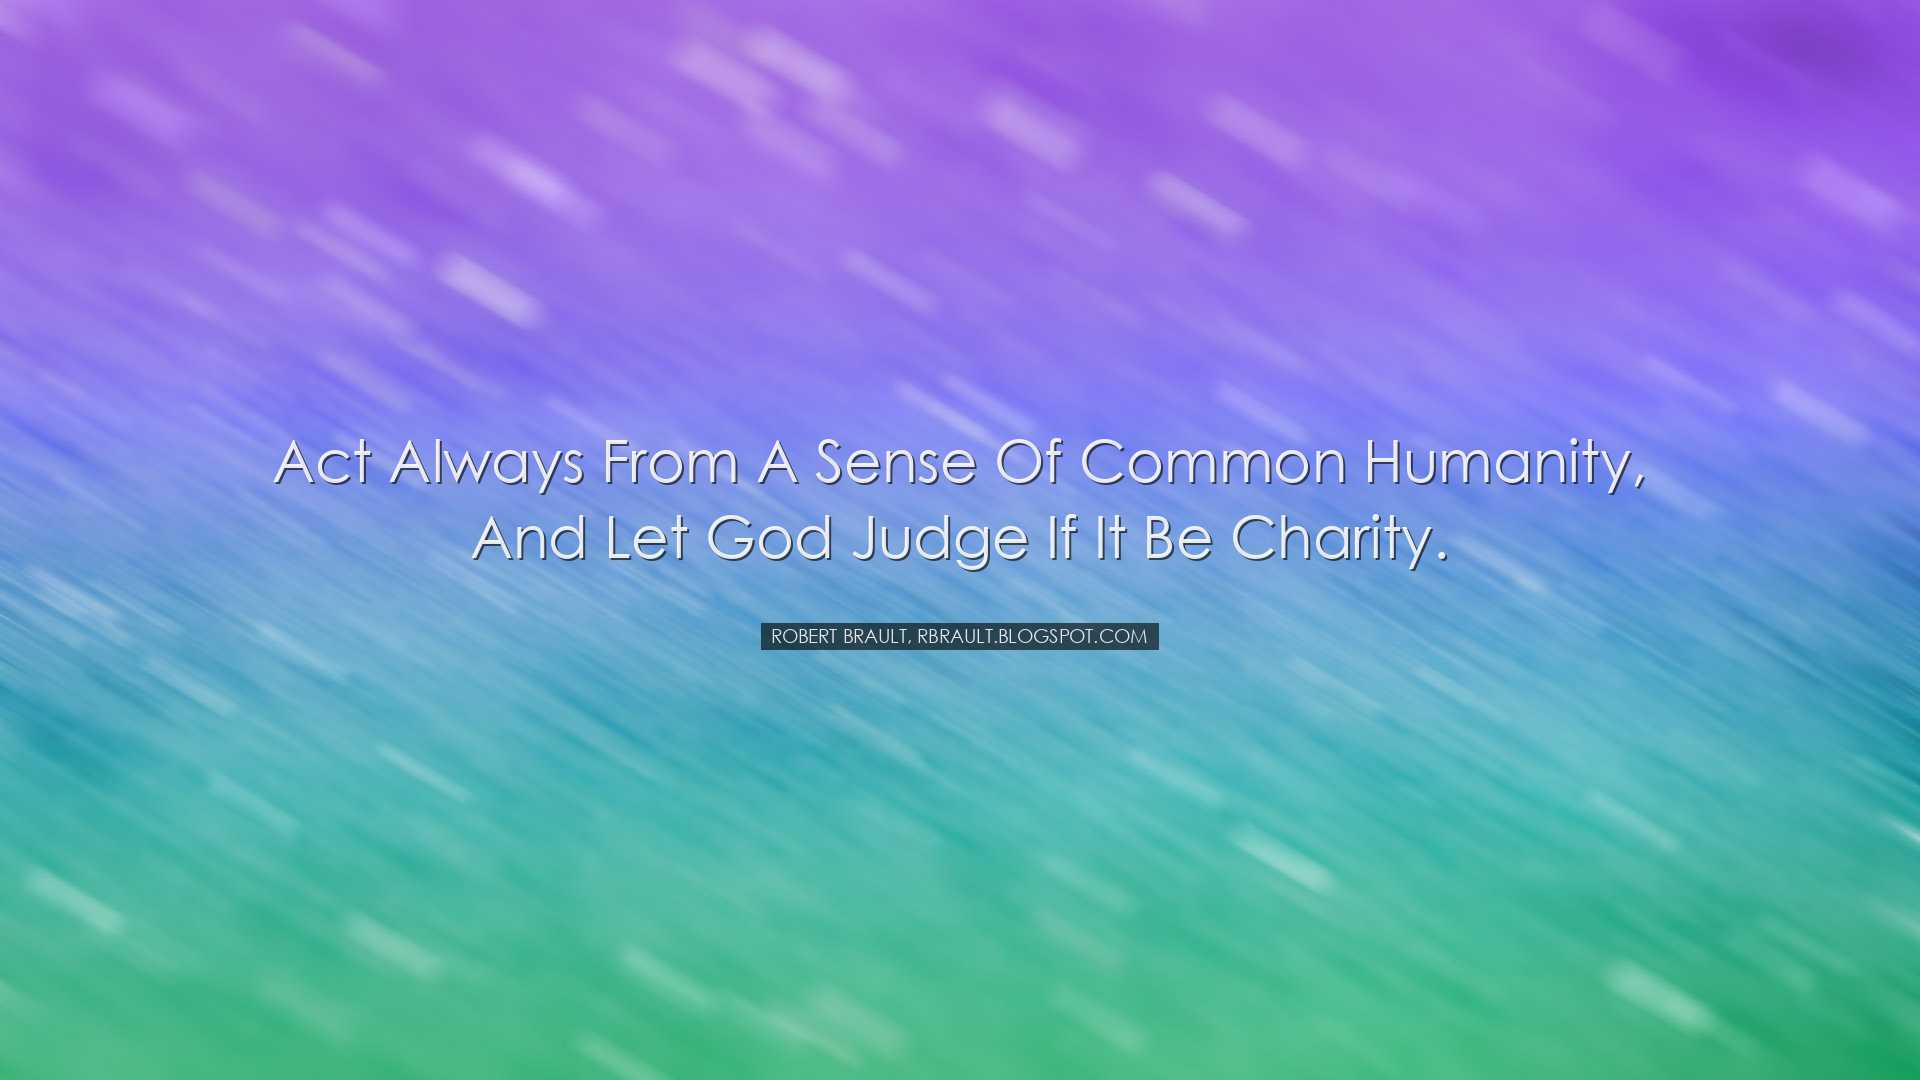 Act always from a sense of common humanity, and let God judge if i